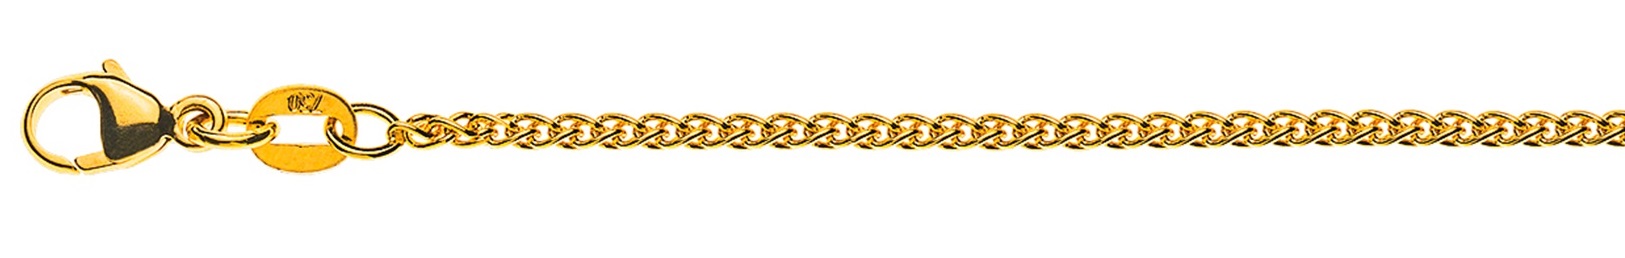 AURONOS Style Necklace yellow gold 9K cable chain 42cm 1.65mm